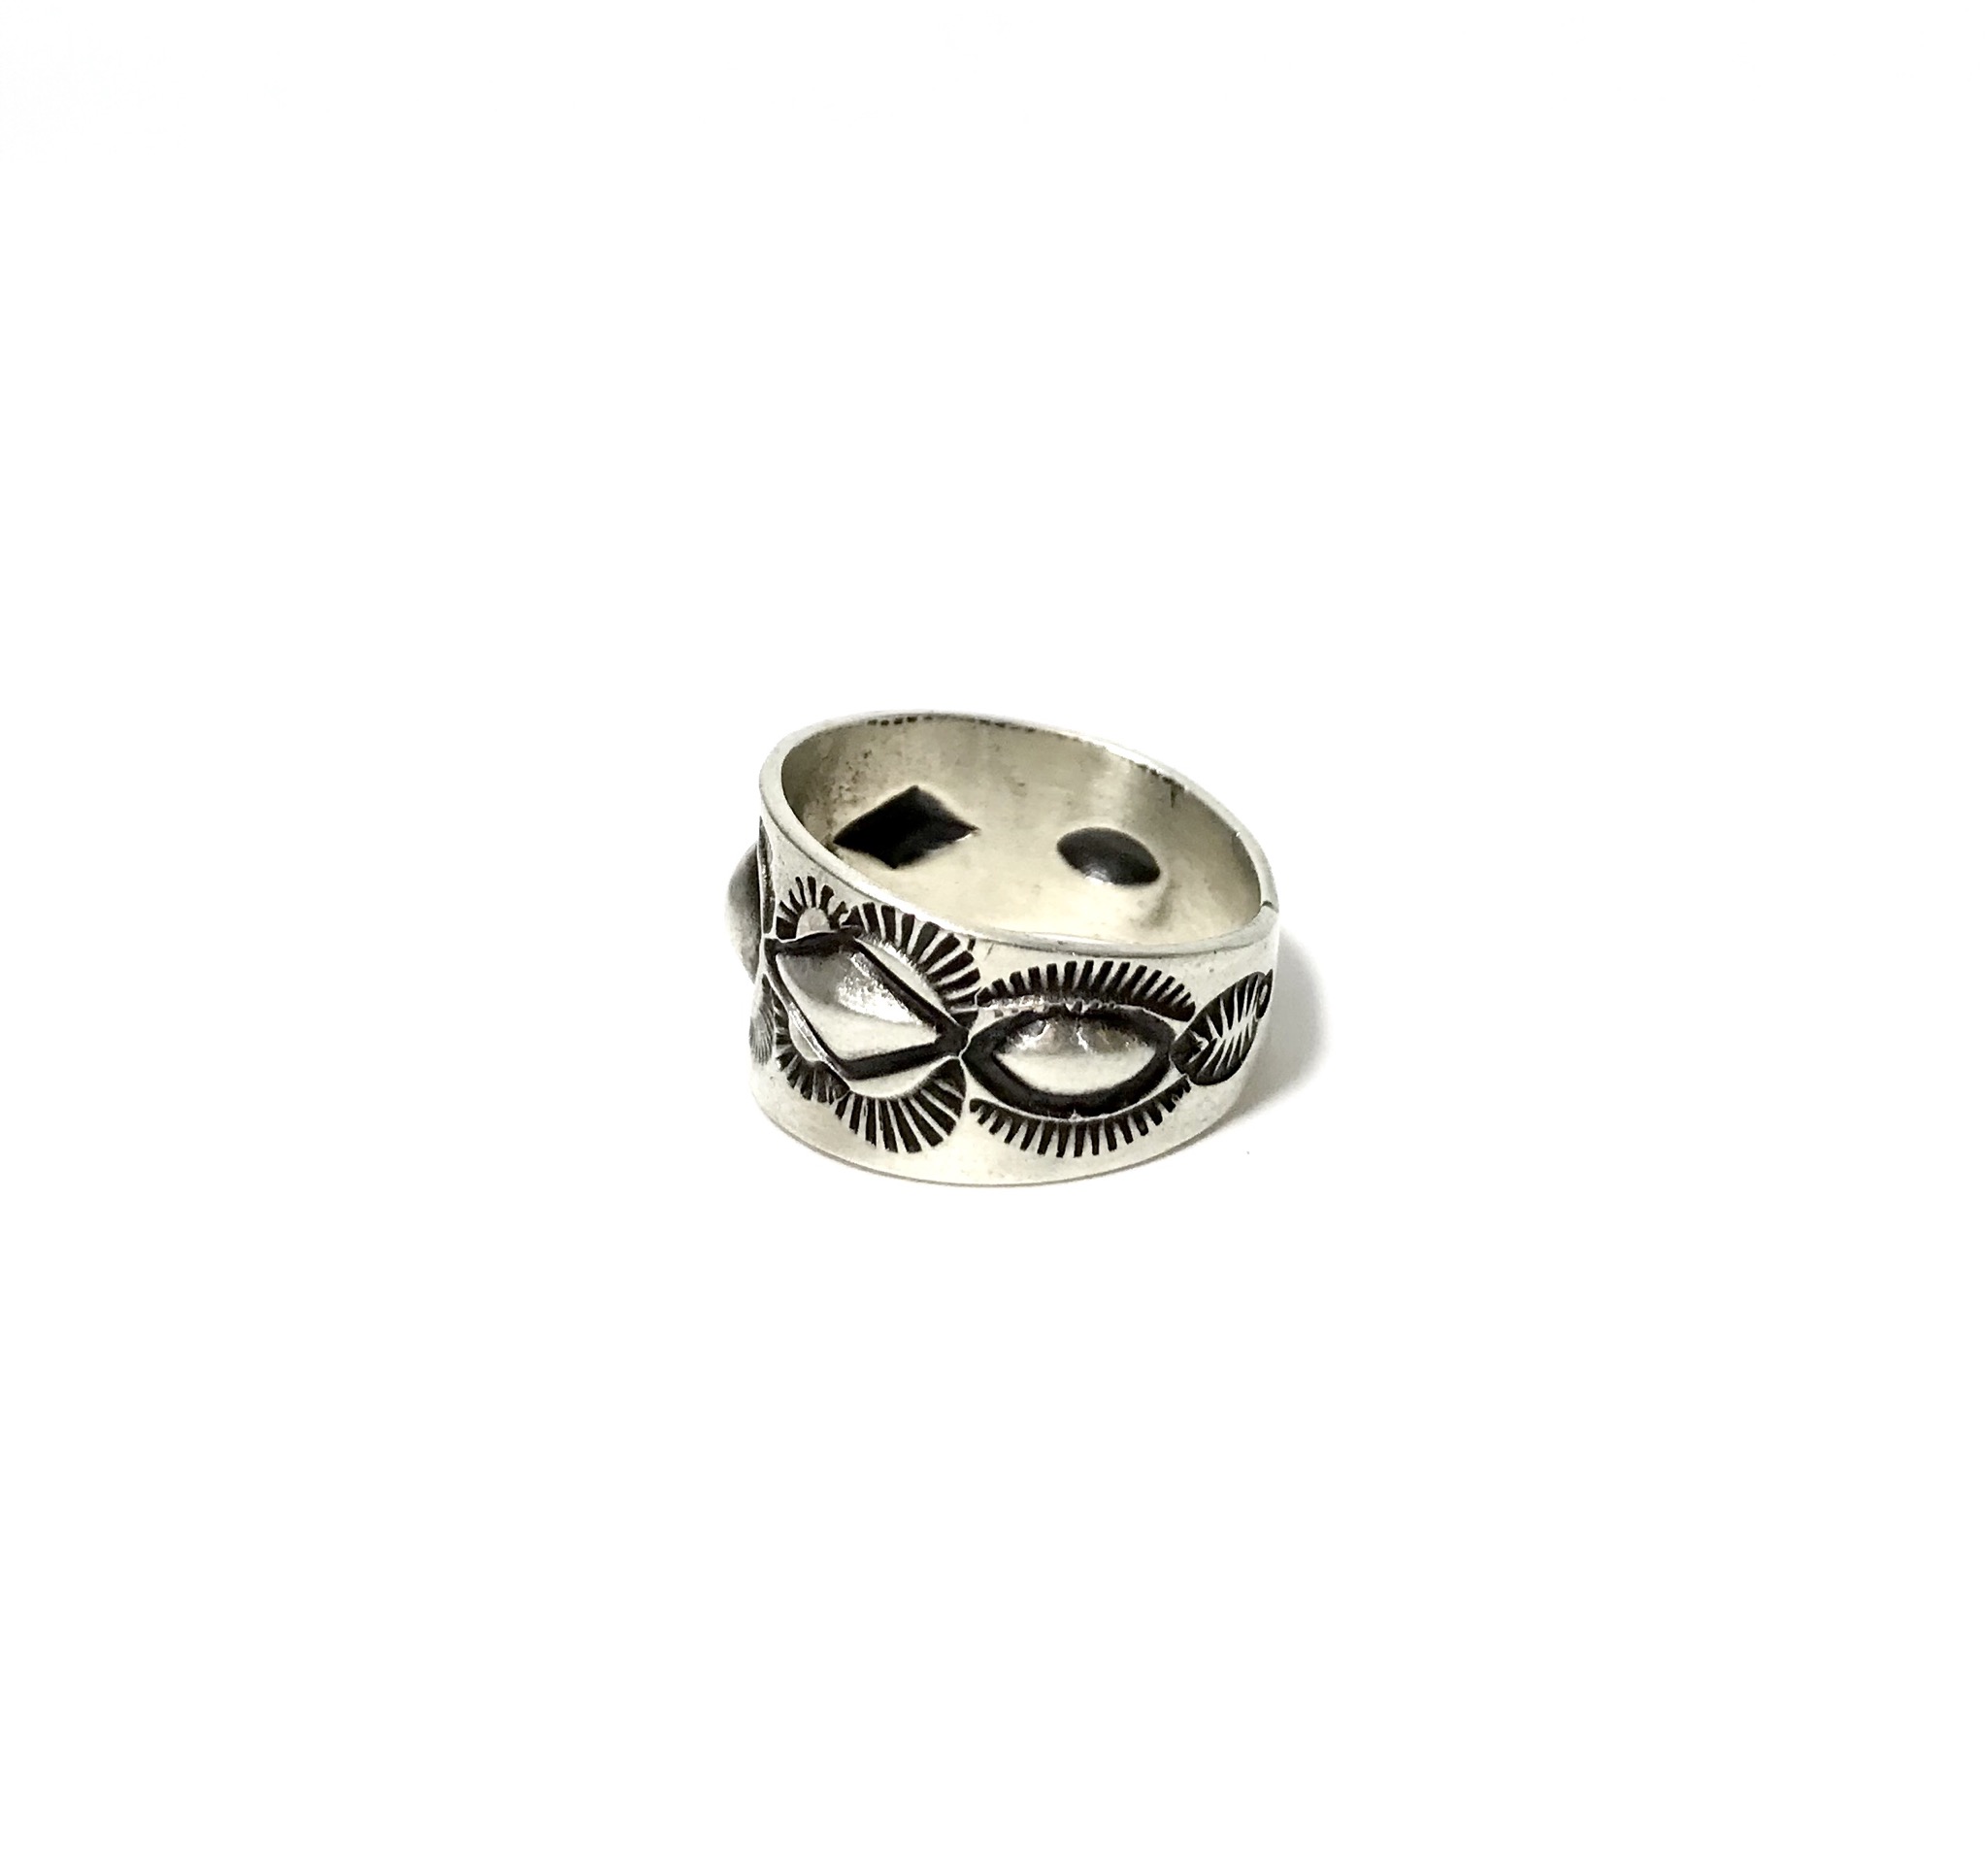 INDIAN JEWELRY NAVAJO族 スタンプワーク RING SILVER/ナバホ族 リング